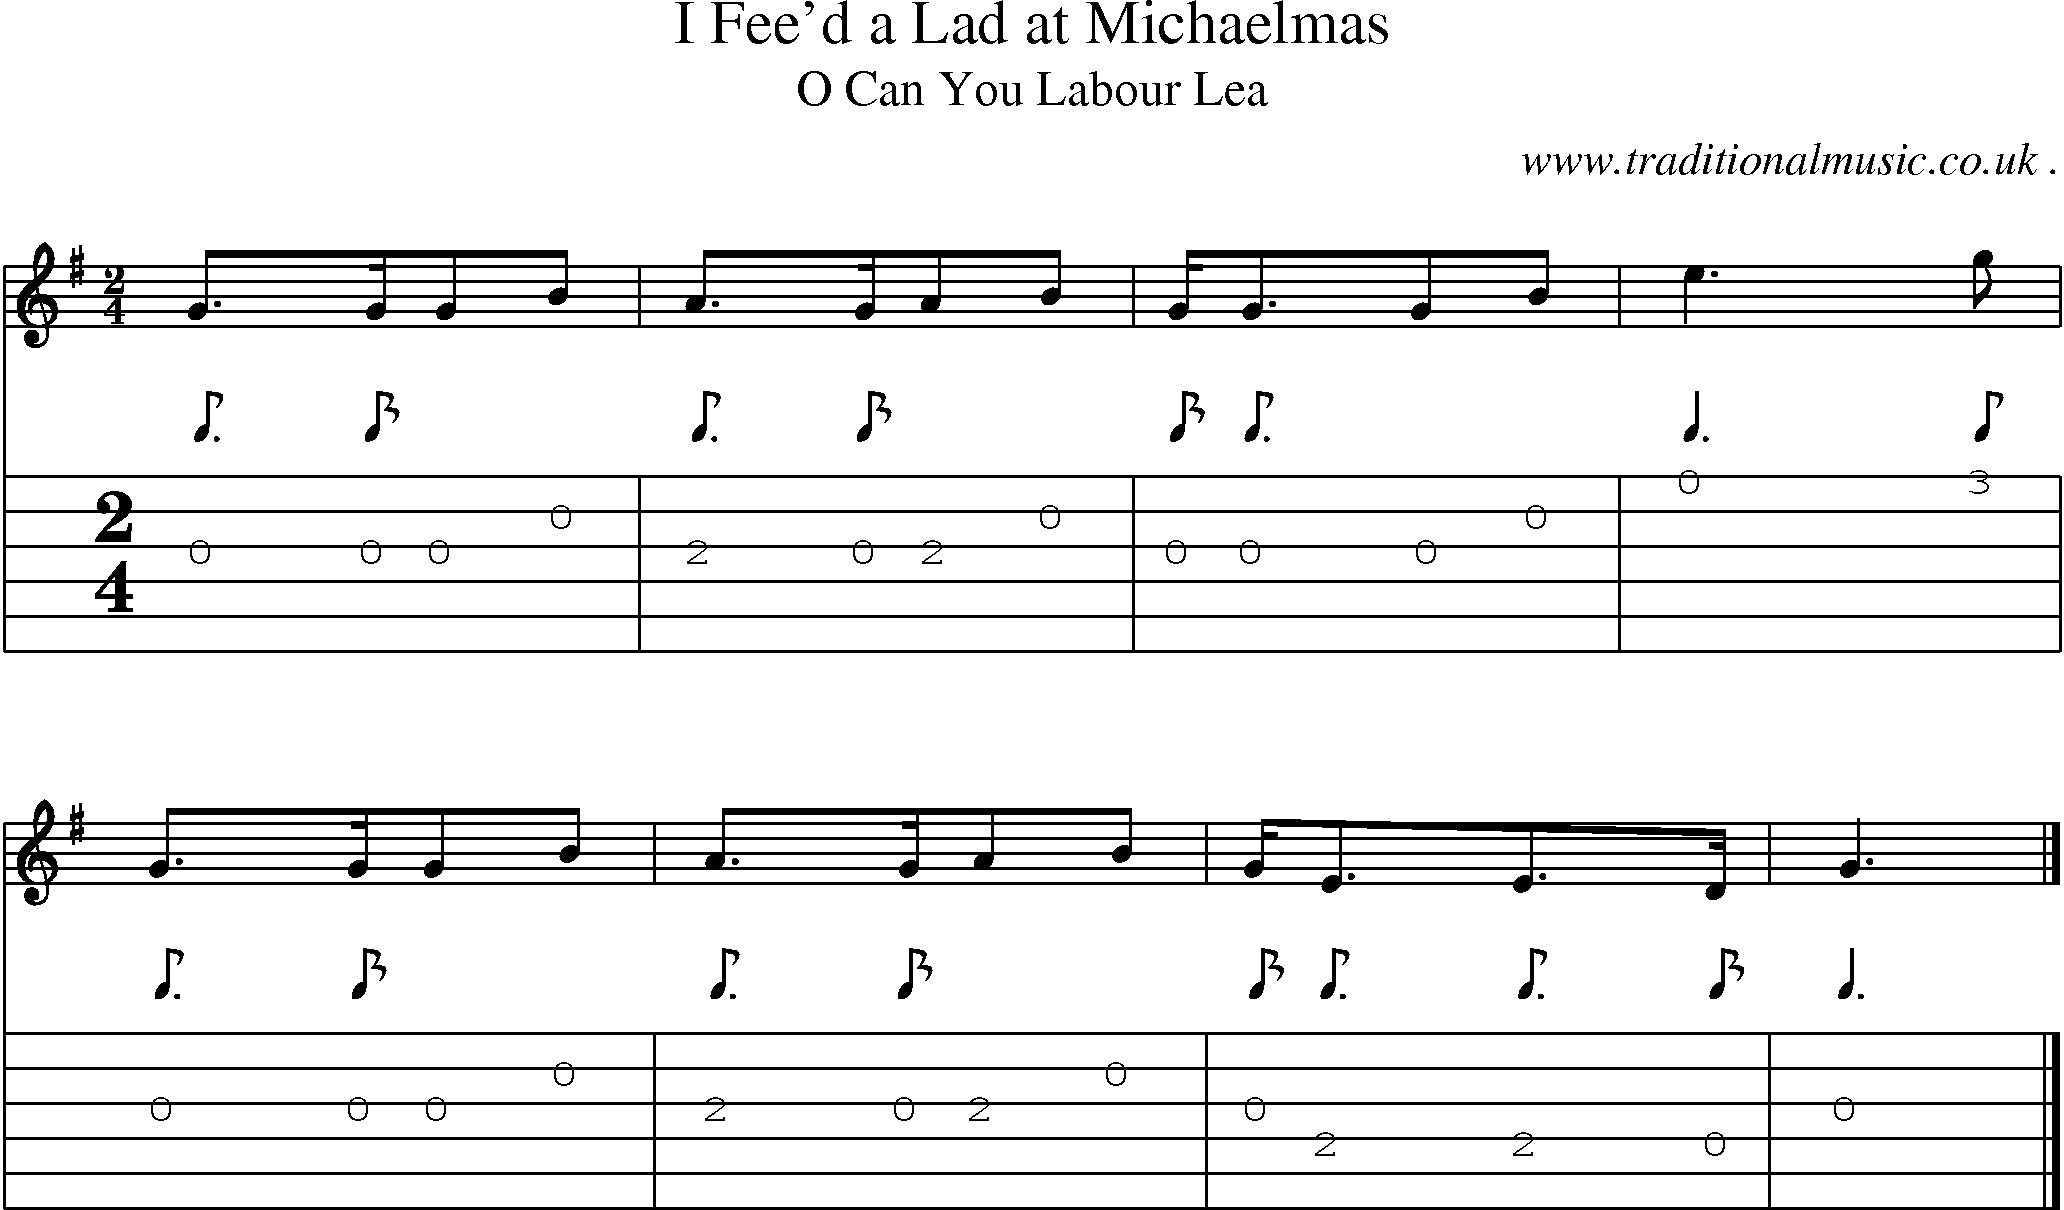 Sheet-music  score, Chords and Guitar Tabs for I Feed A Lad At Michaelmas